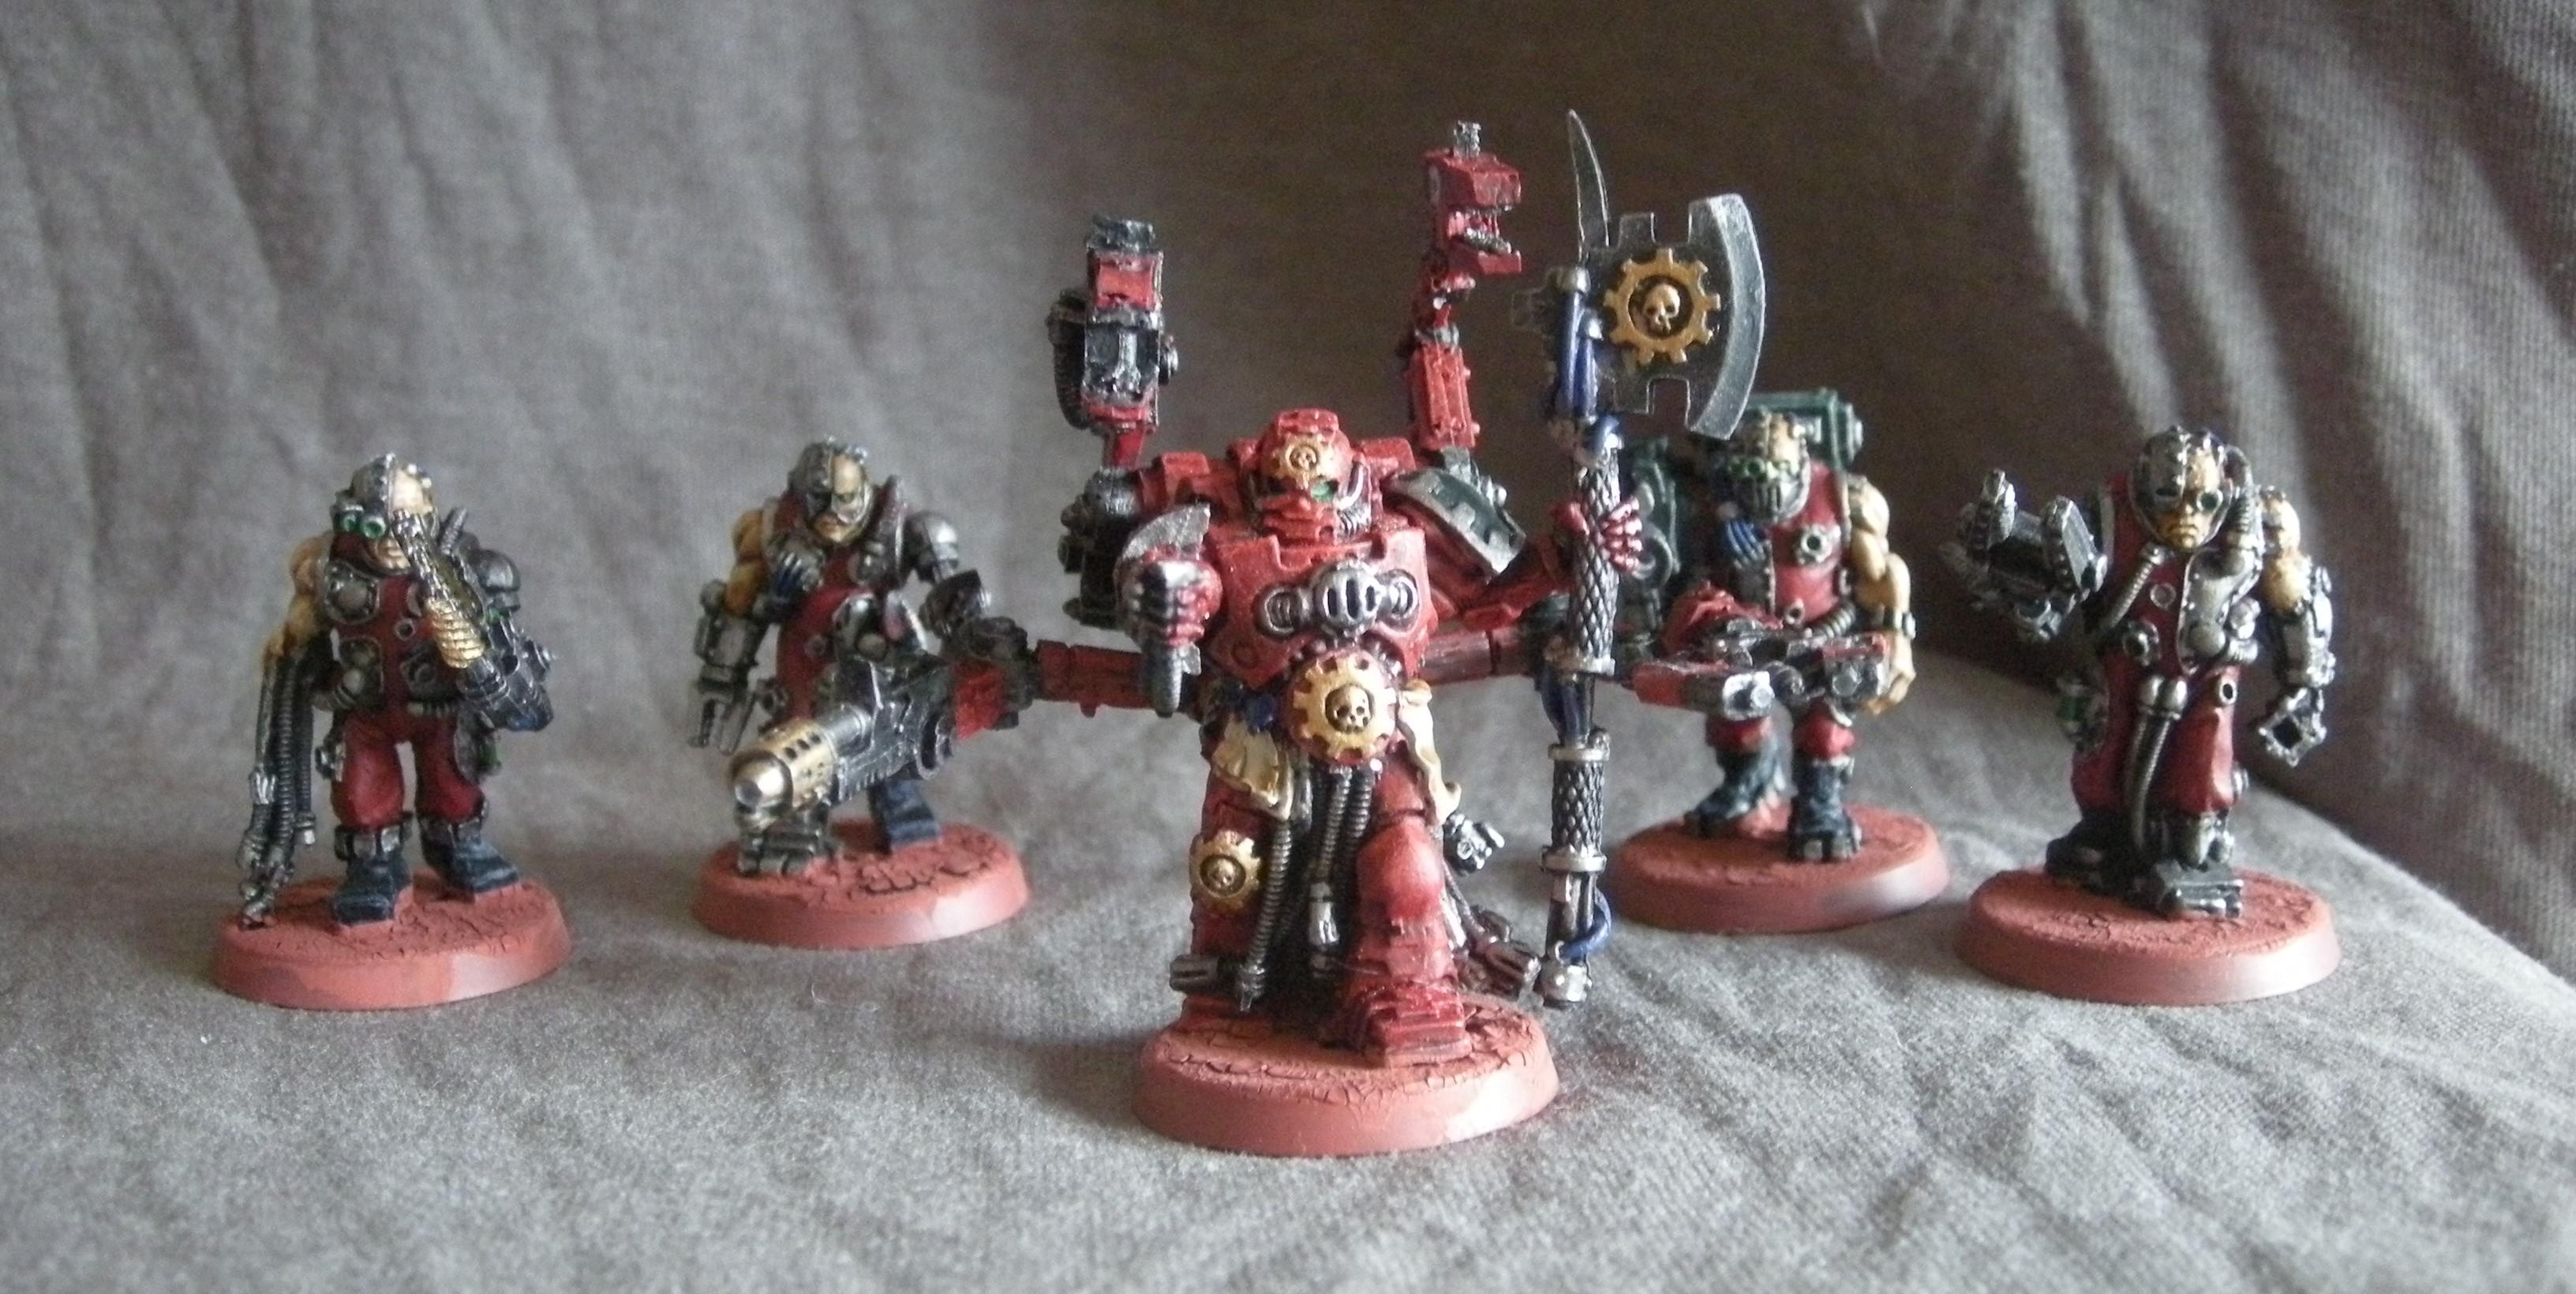 My first HQ unit as I was playing small games to get back into 40K